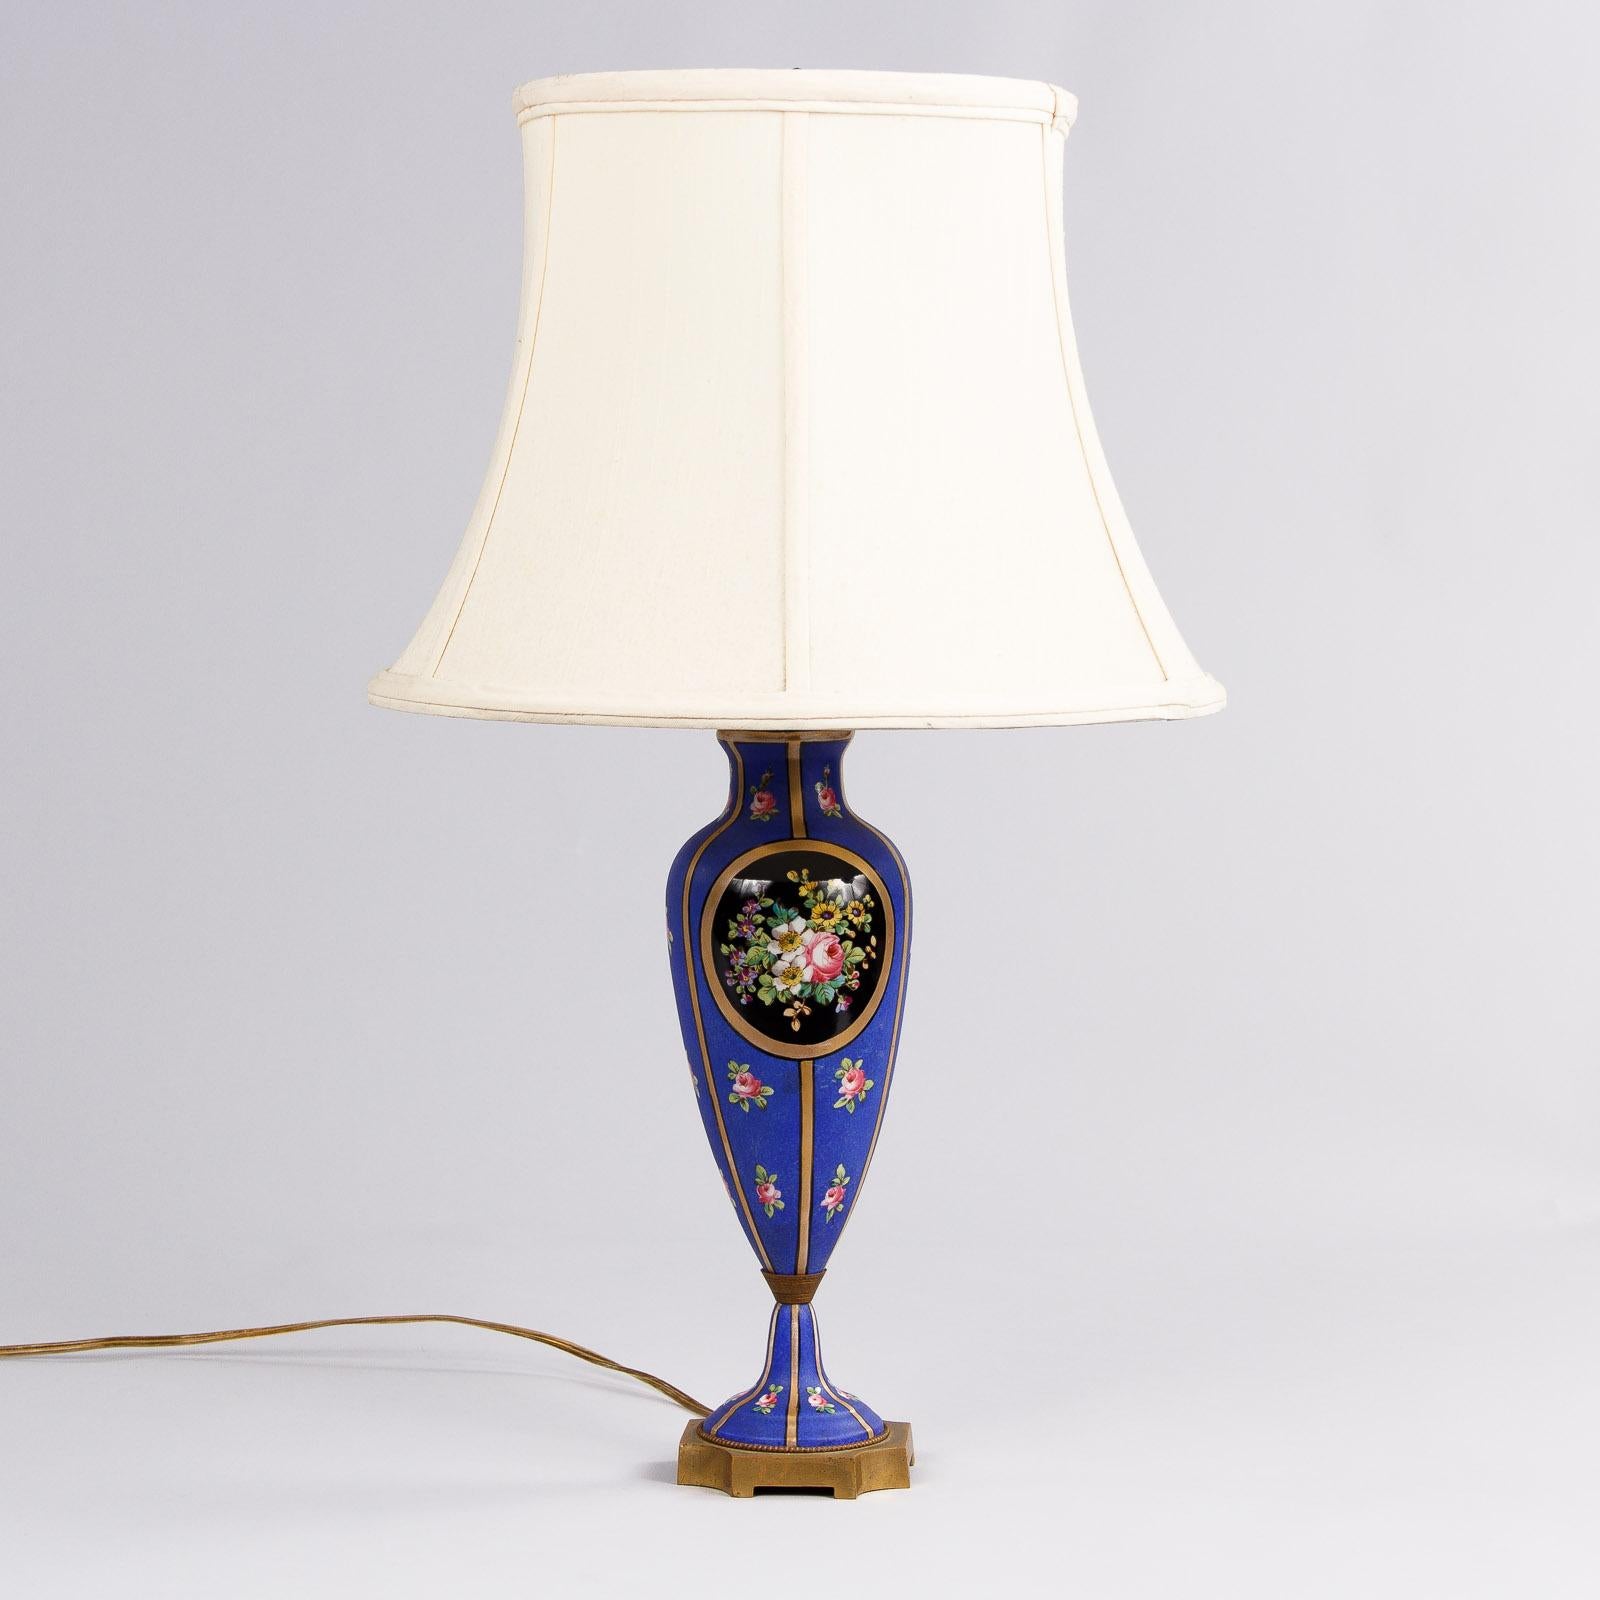 20th Century French Vieux Paris Porcelain Table Lamp, Early 1900s